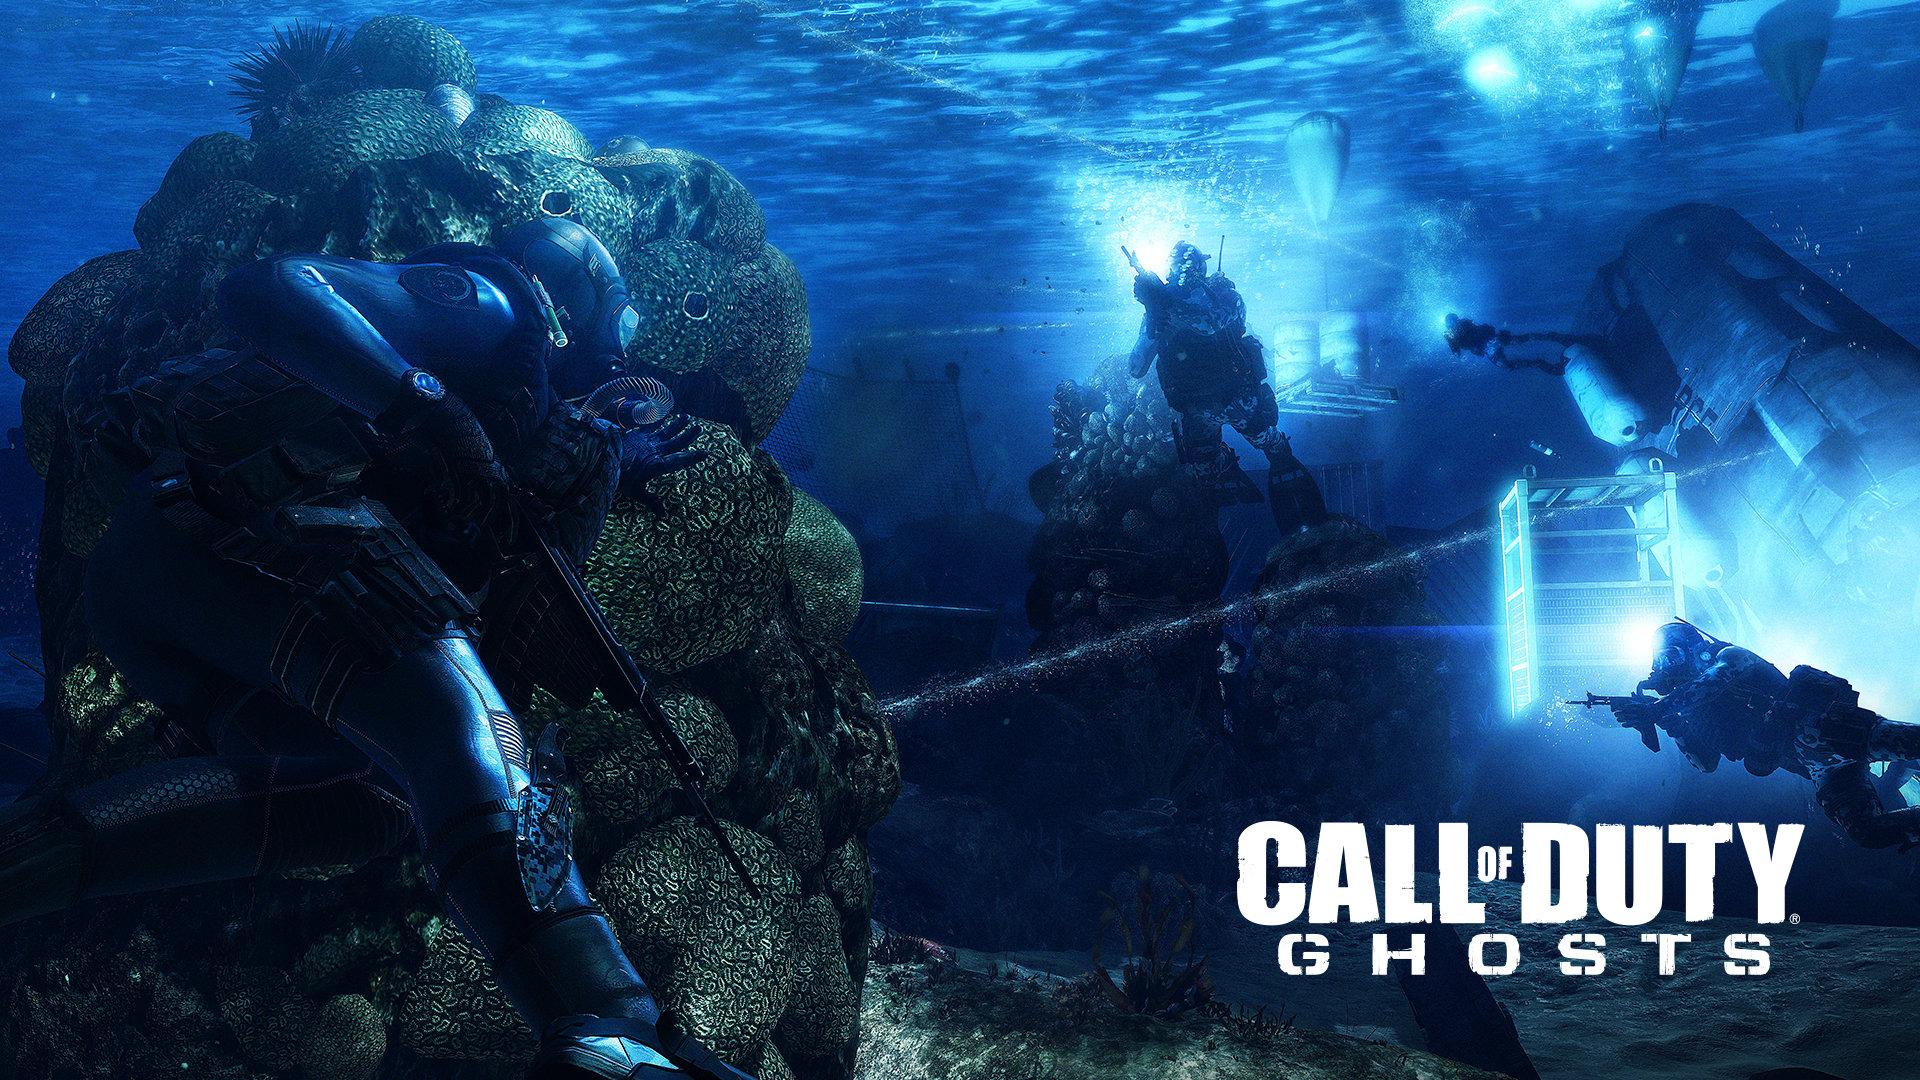 Call Of Duty Ghosts Wallpaper - Call Of Duty Ghosts Scuba - HD Wallpaper 